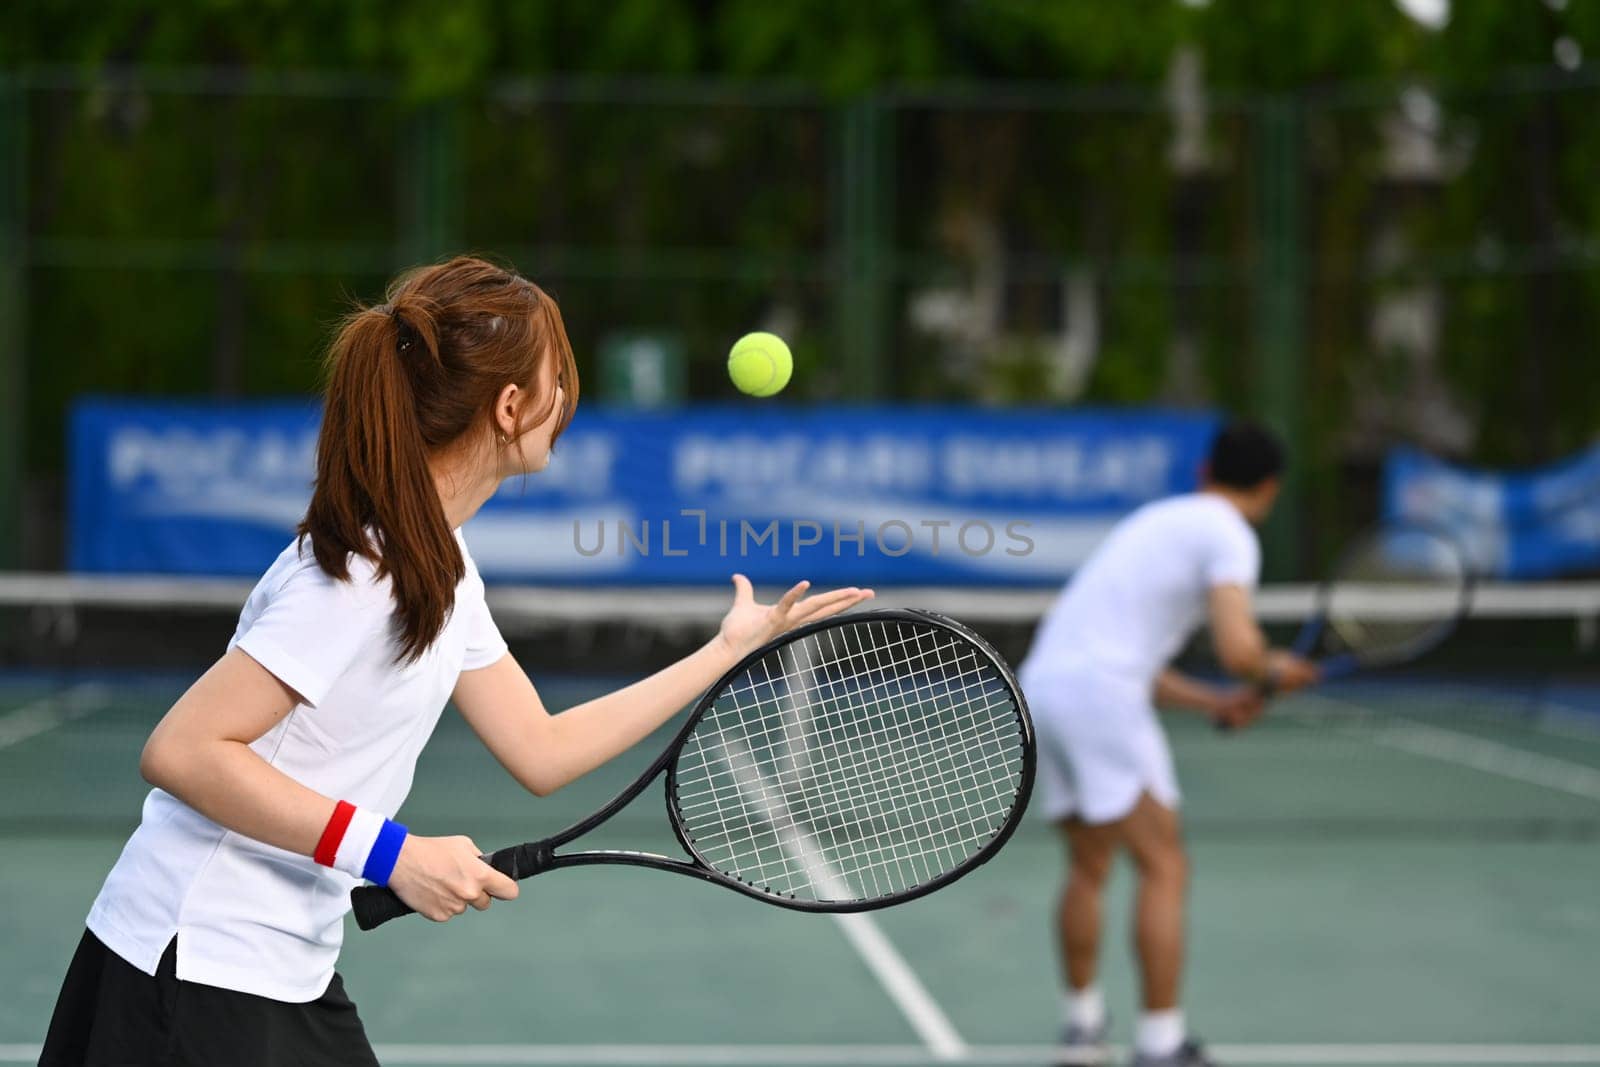 Tennis player serving tennis ball during a match on open court. Sport, fitness, training and active life concept by prathanchorruangsak